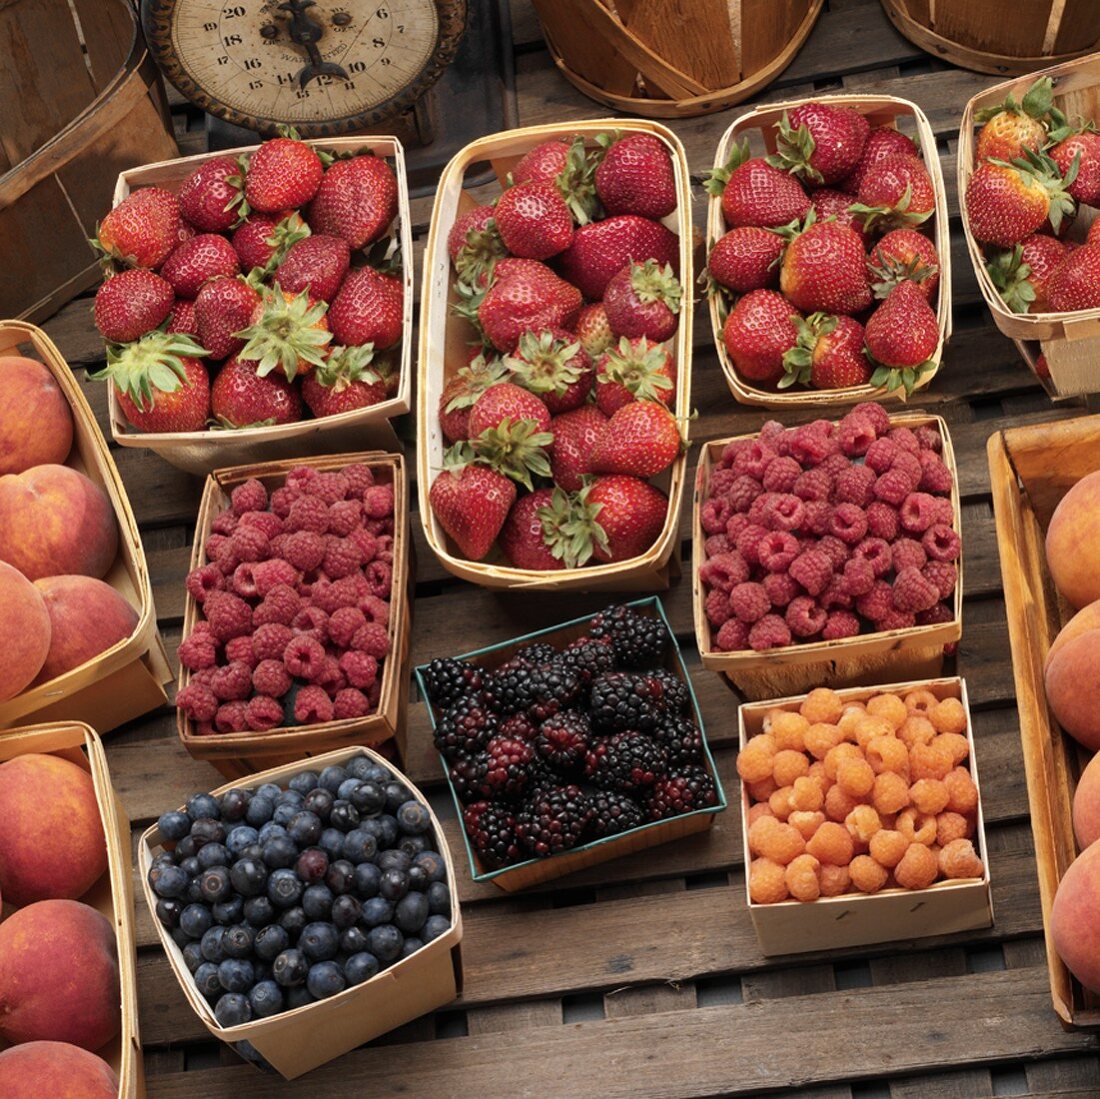 Assorted Berries in Containers at a Market